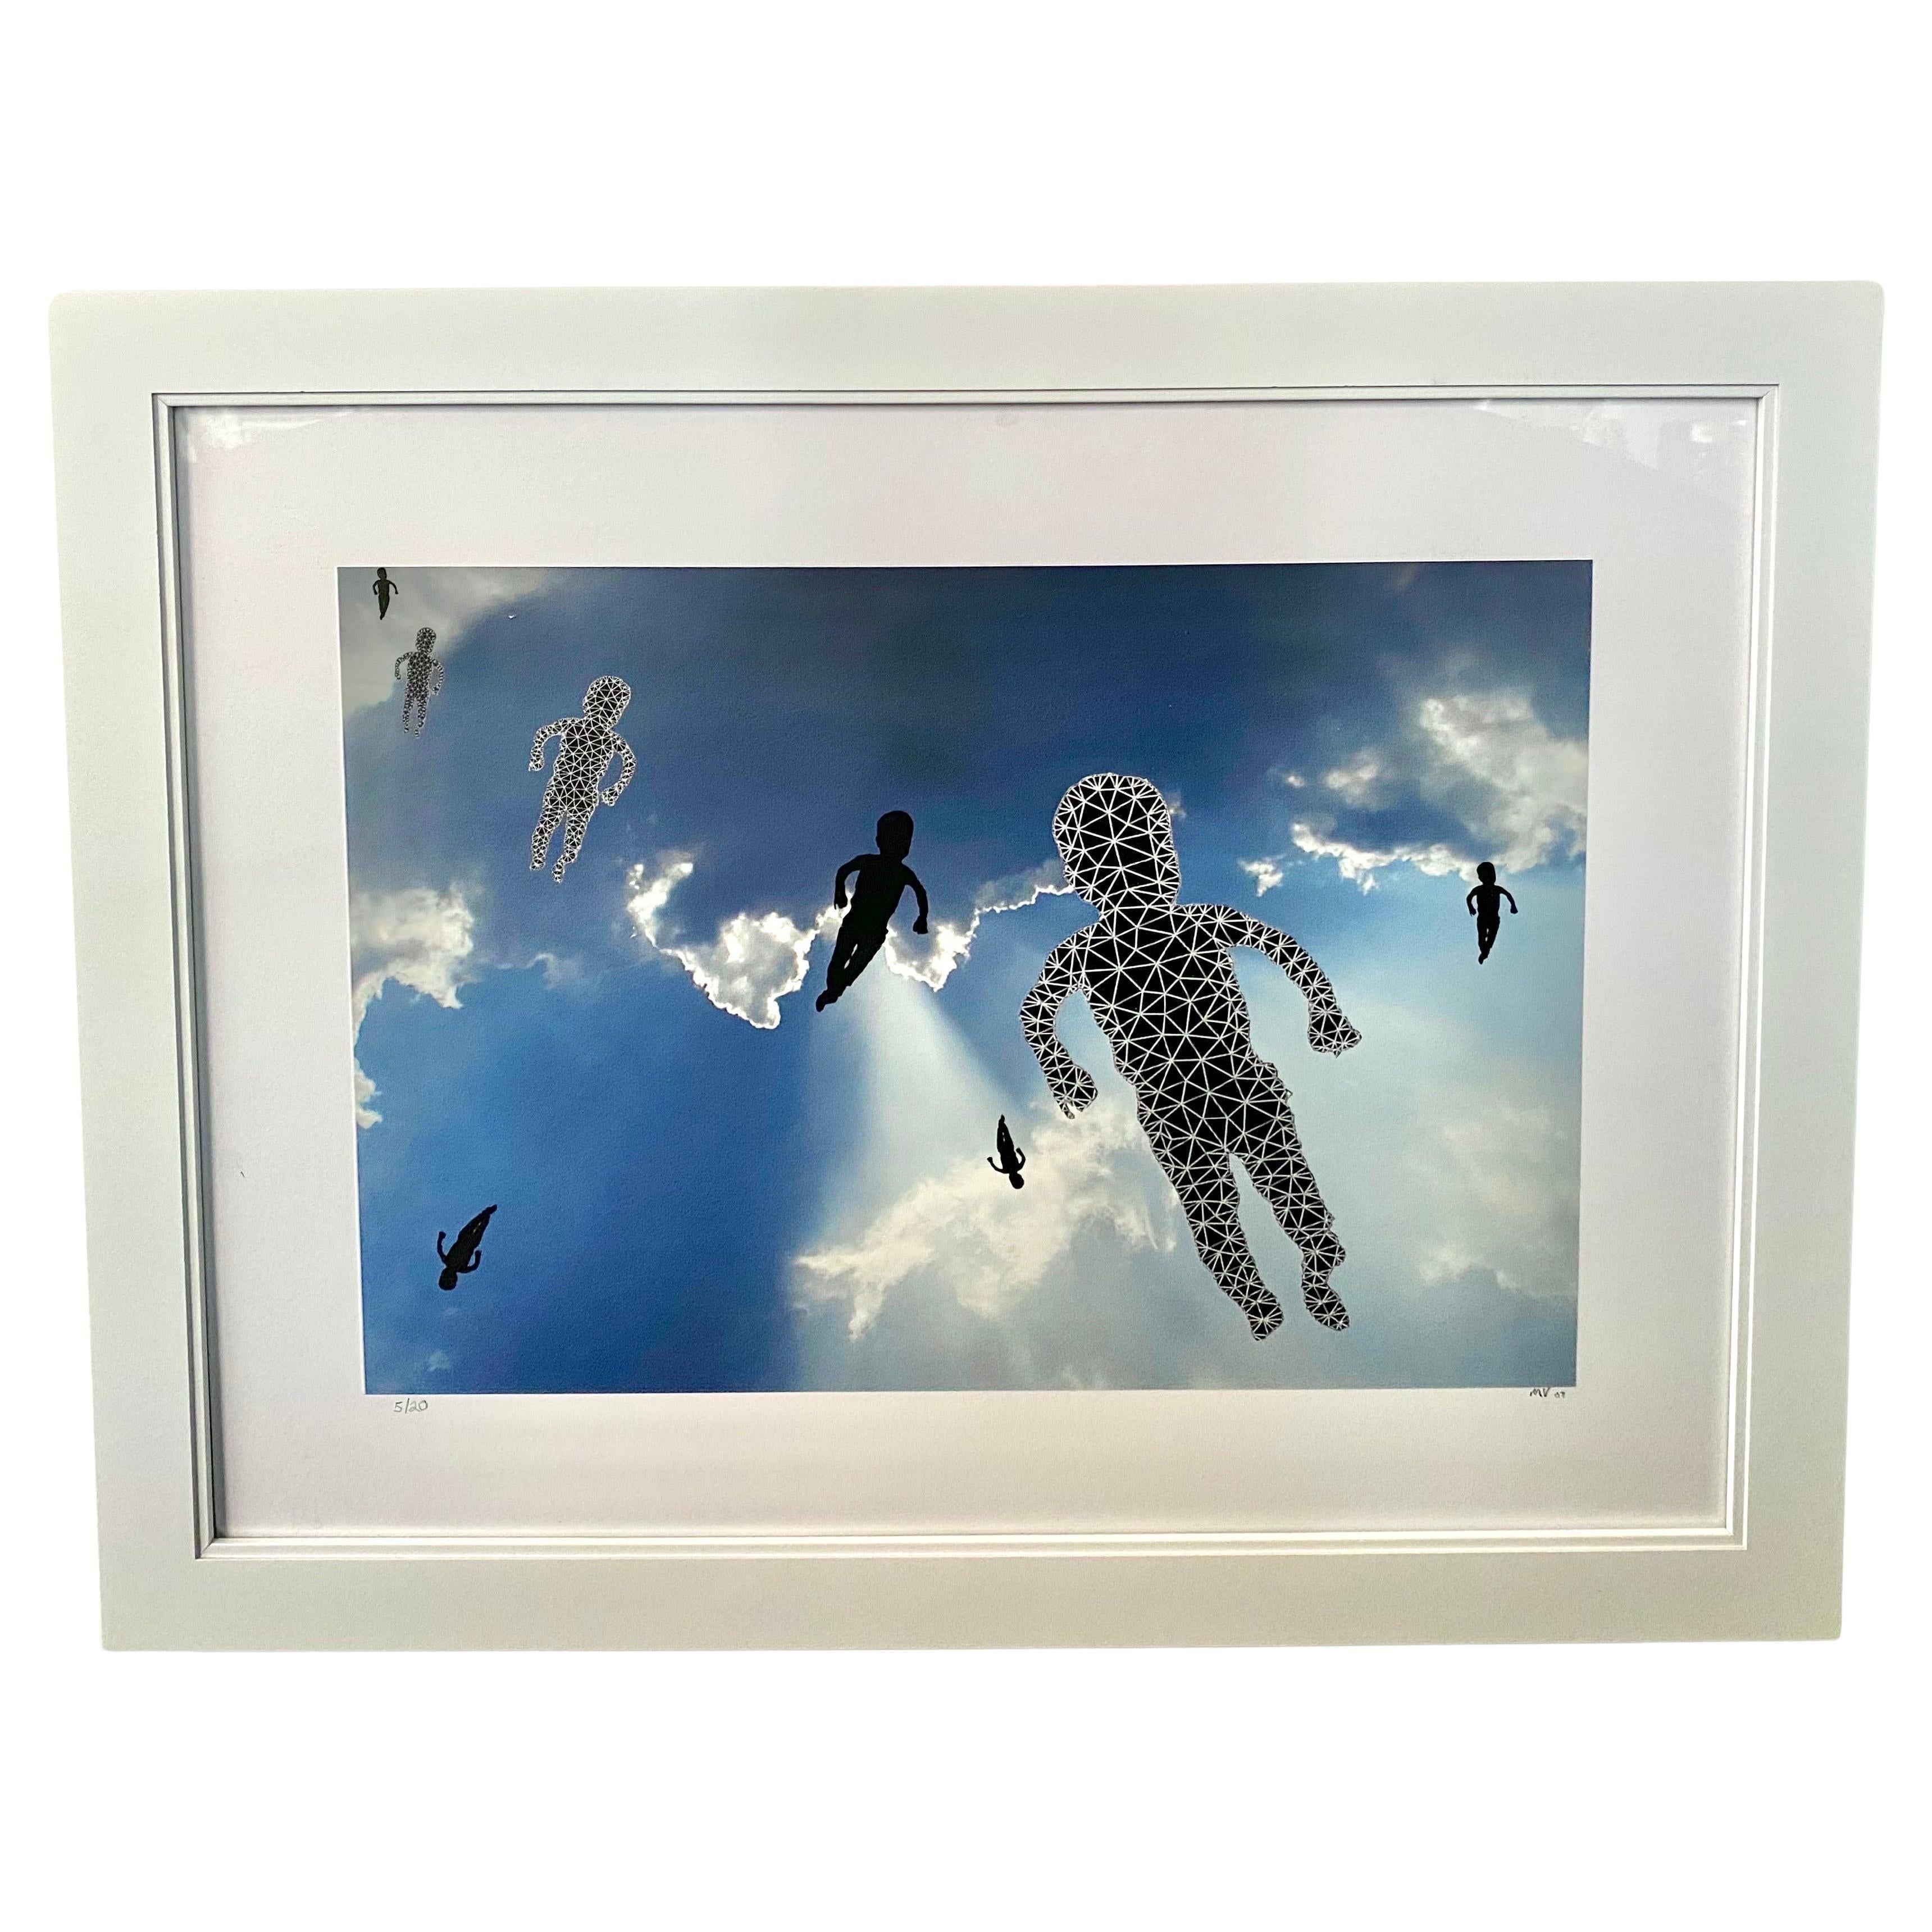 A digital photography print entitled "Children from heaven" Numbered 1/20 by the contemporary artist Marc Vandermeer ( American, 1950's ). Featuring shapes of children floating in a blue gray crisp sky. The art work is an artistic and noble reminder